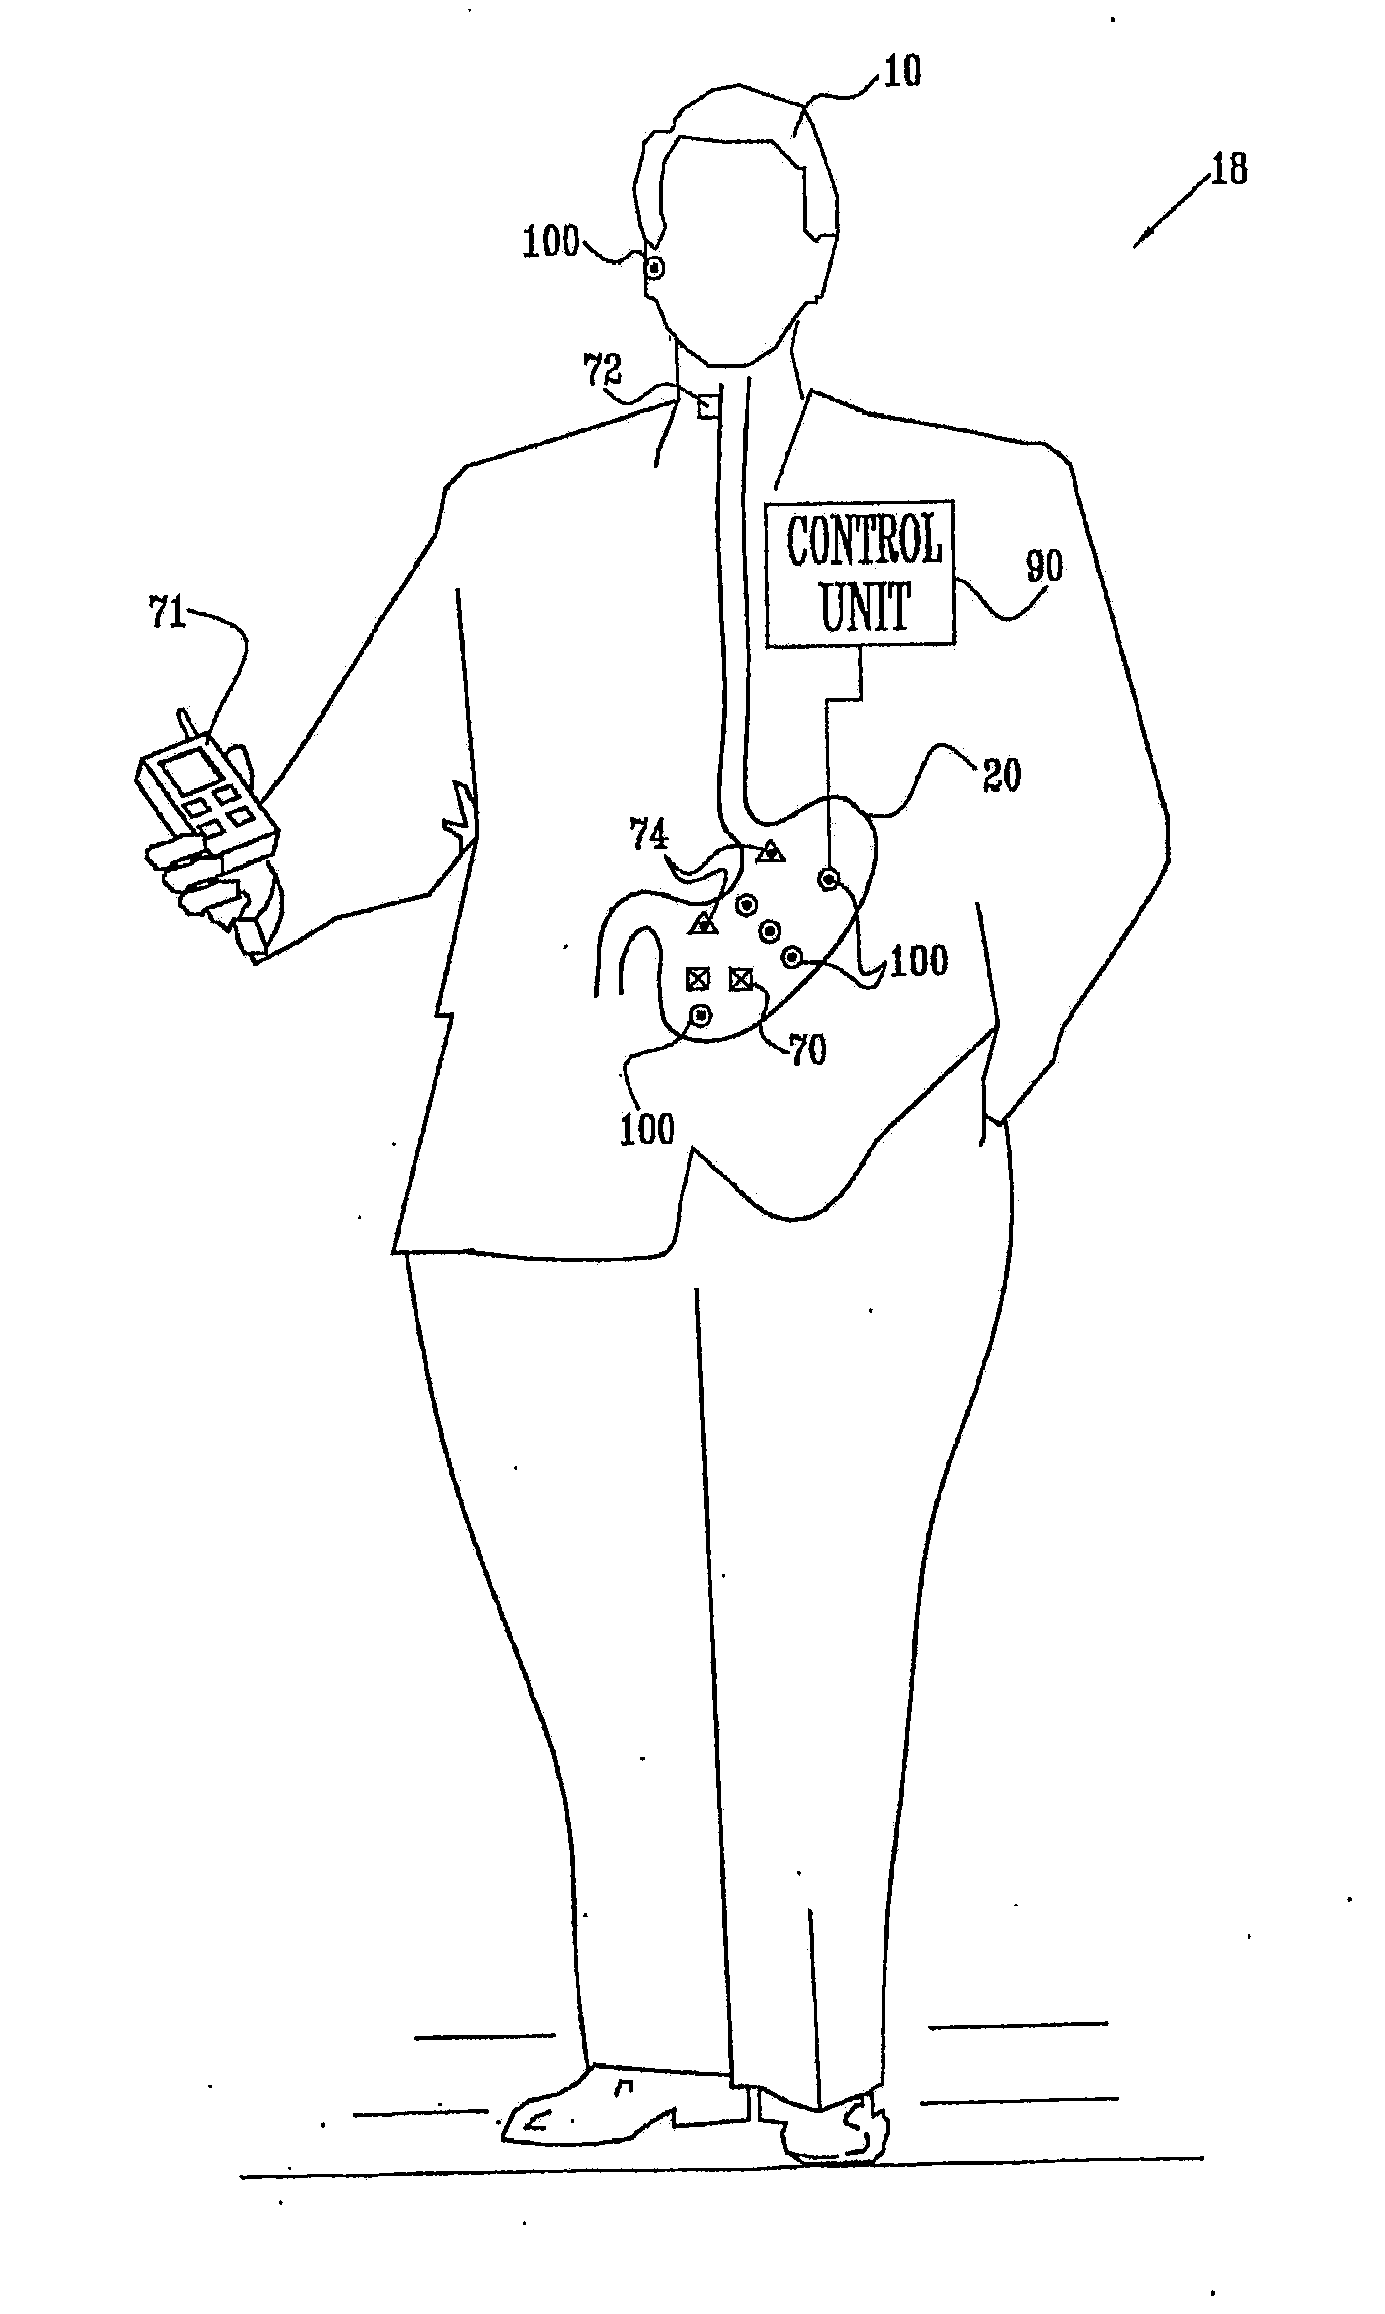 Charger With Data Transfer Capabilities